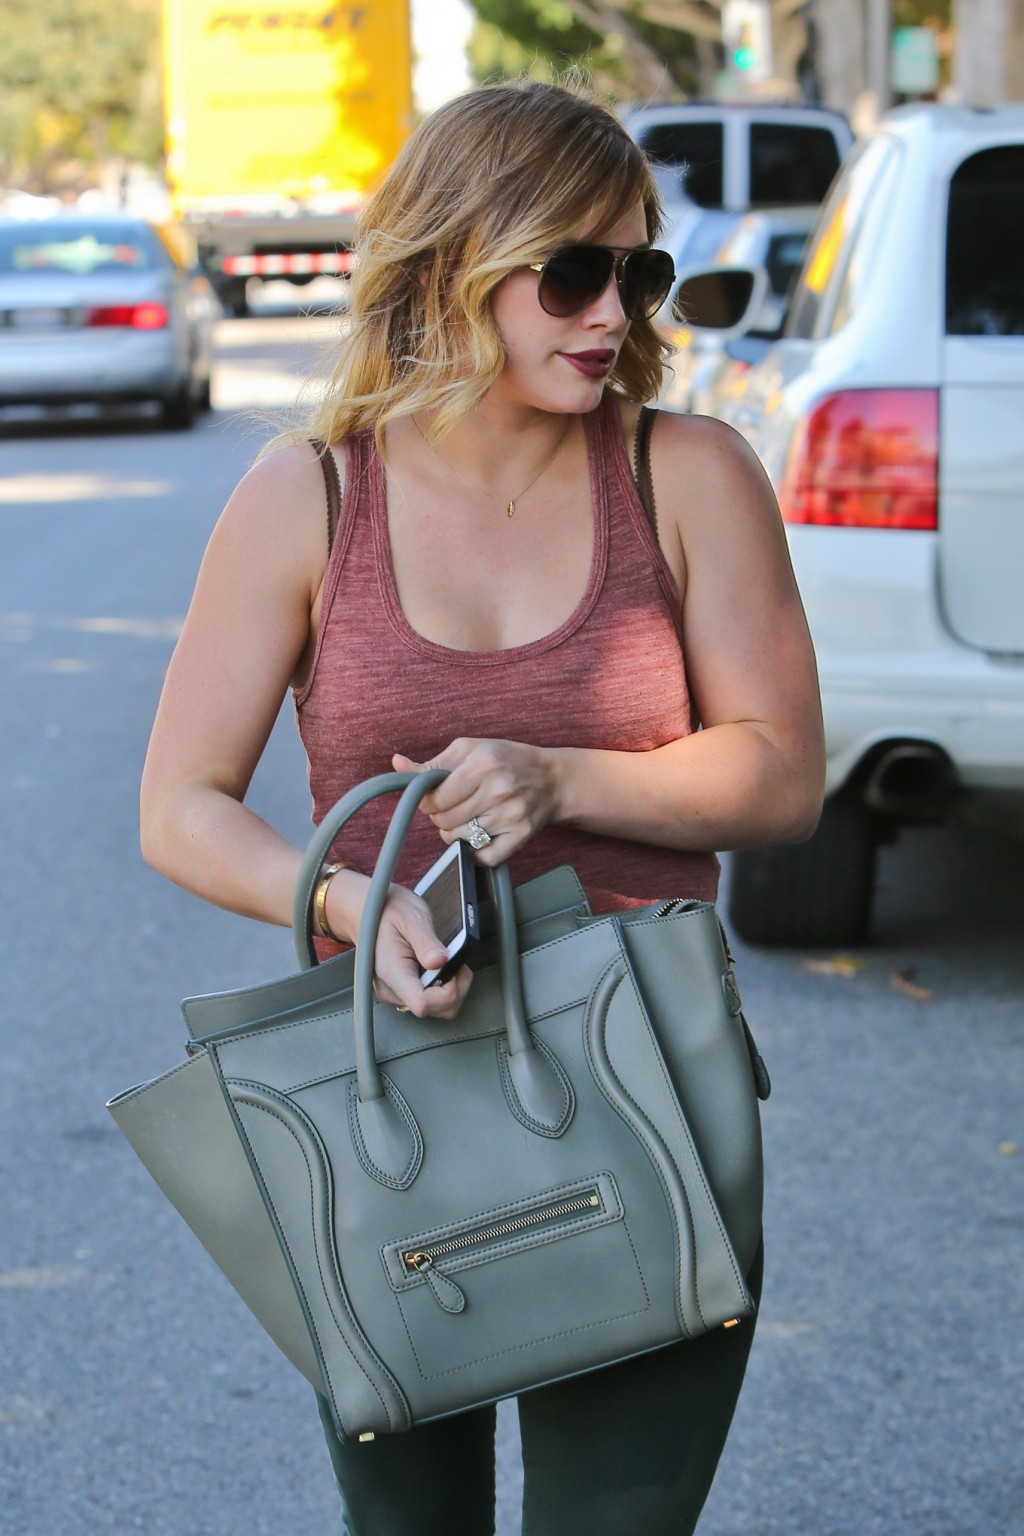 Hilary Duff trägt ein knappes rotes Top und enge Jeans in Beverly Hills
 #75234525